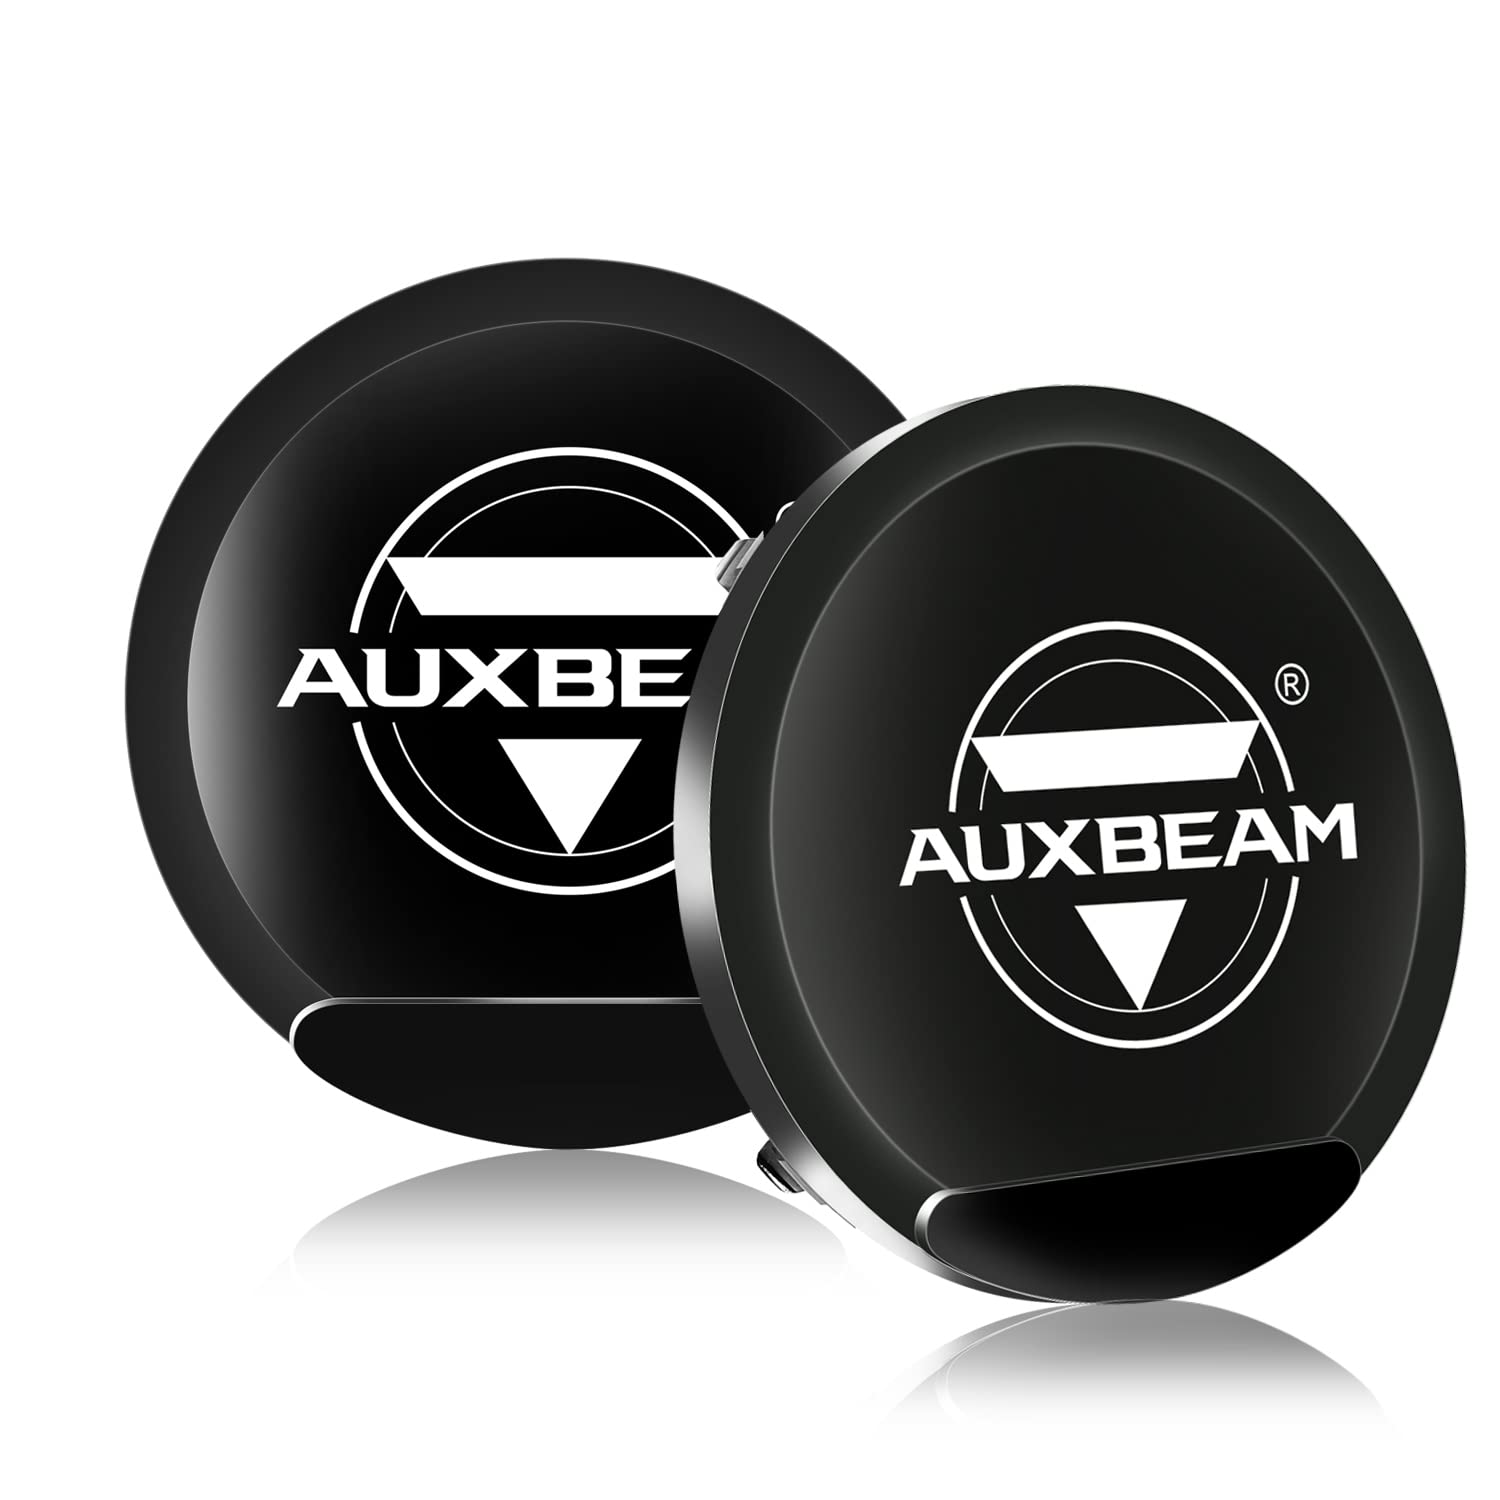 Auxbeam 9 inch Round Offroad Light Covers, Black Protective Covers with Logo Waterproof Dustproof Plastic PC Lens for 9" Off Road Driving Pods Light Bar, Pair